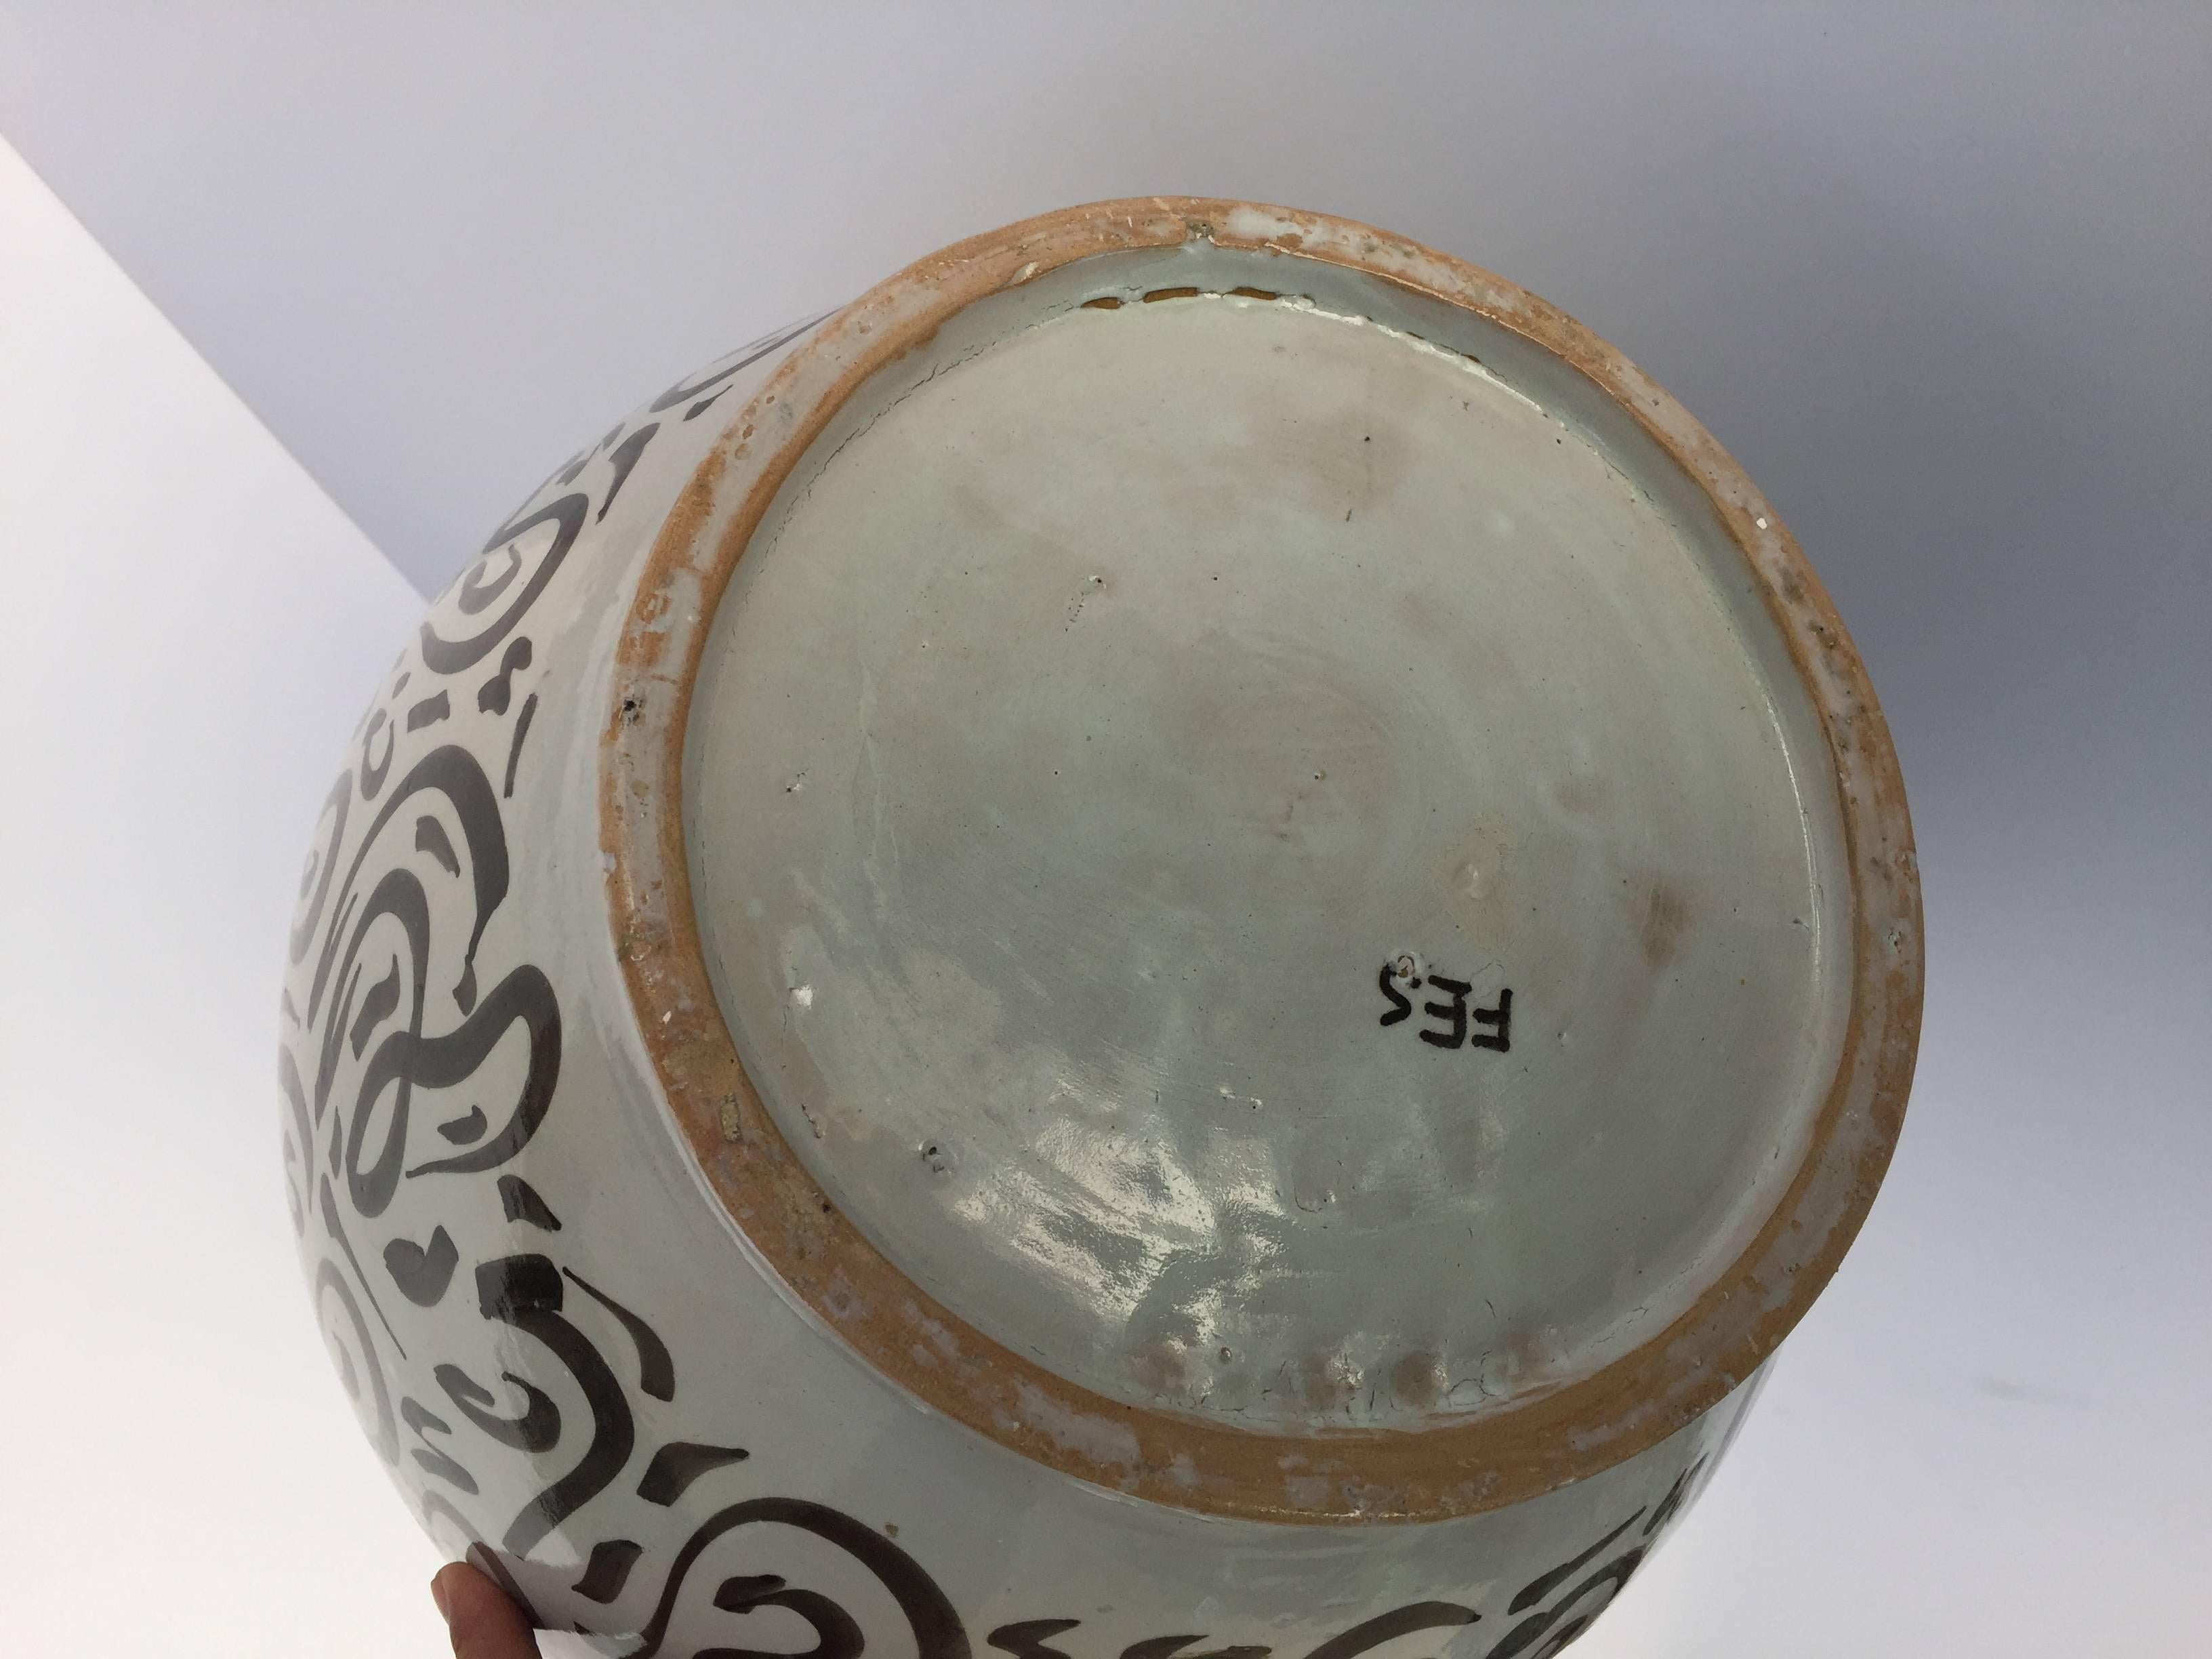 20th Century Large Moroccan Glazed Ceramic Vase from Fez with Arabic Calligraphy Writing For Sale